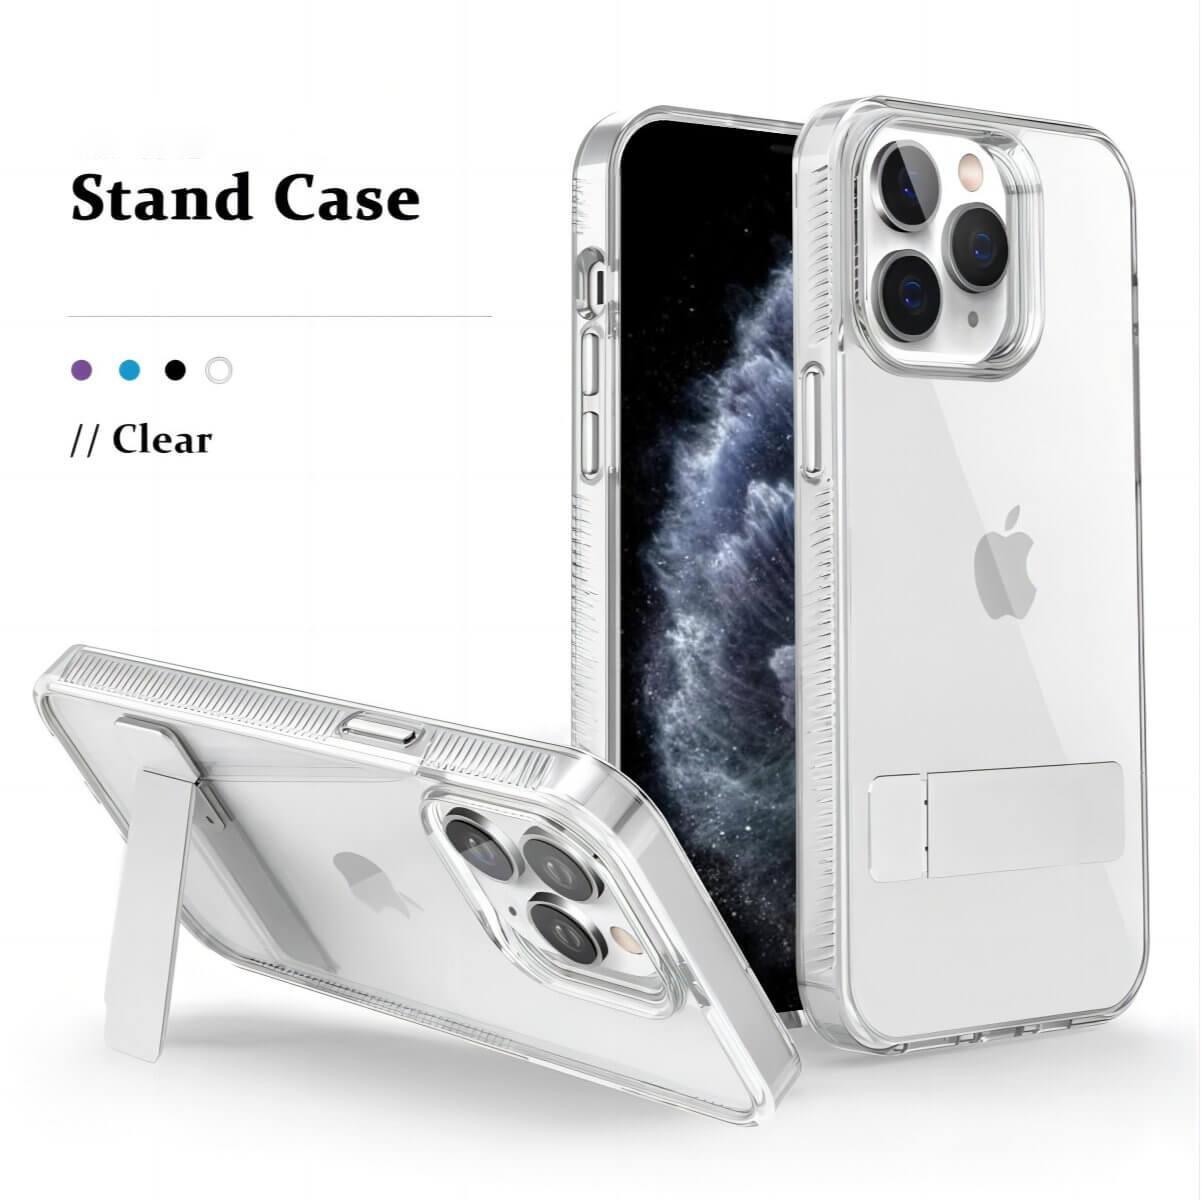 iPhone 11 Pro/Max/12 Pro Max Stand Case Crystal Clear